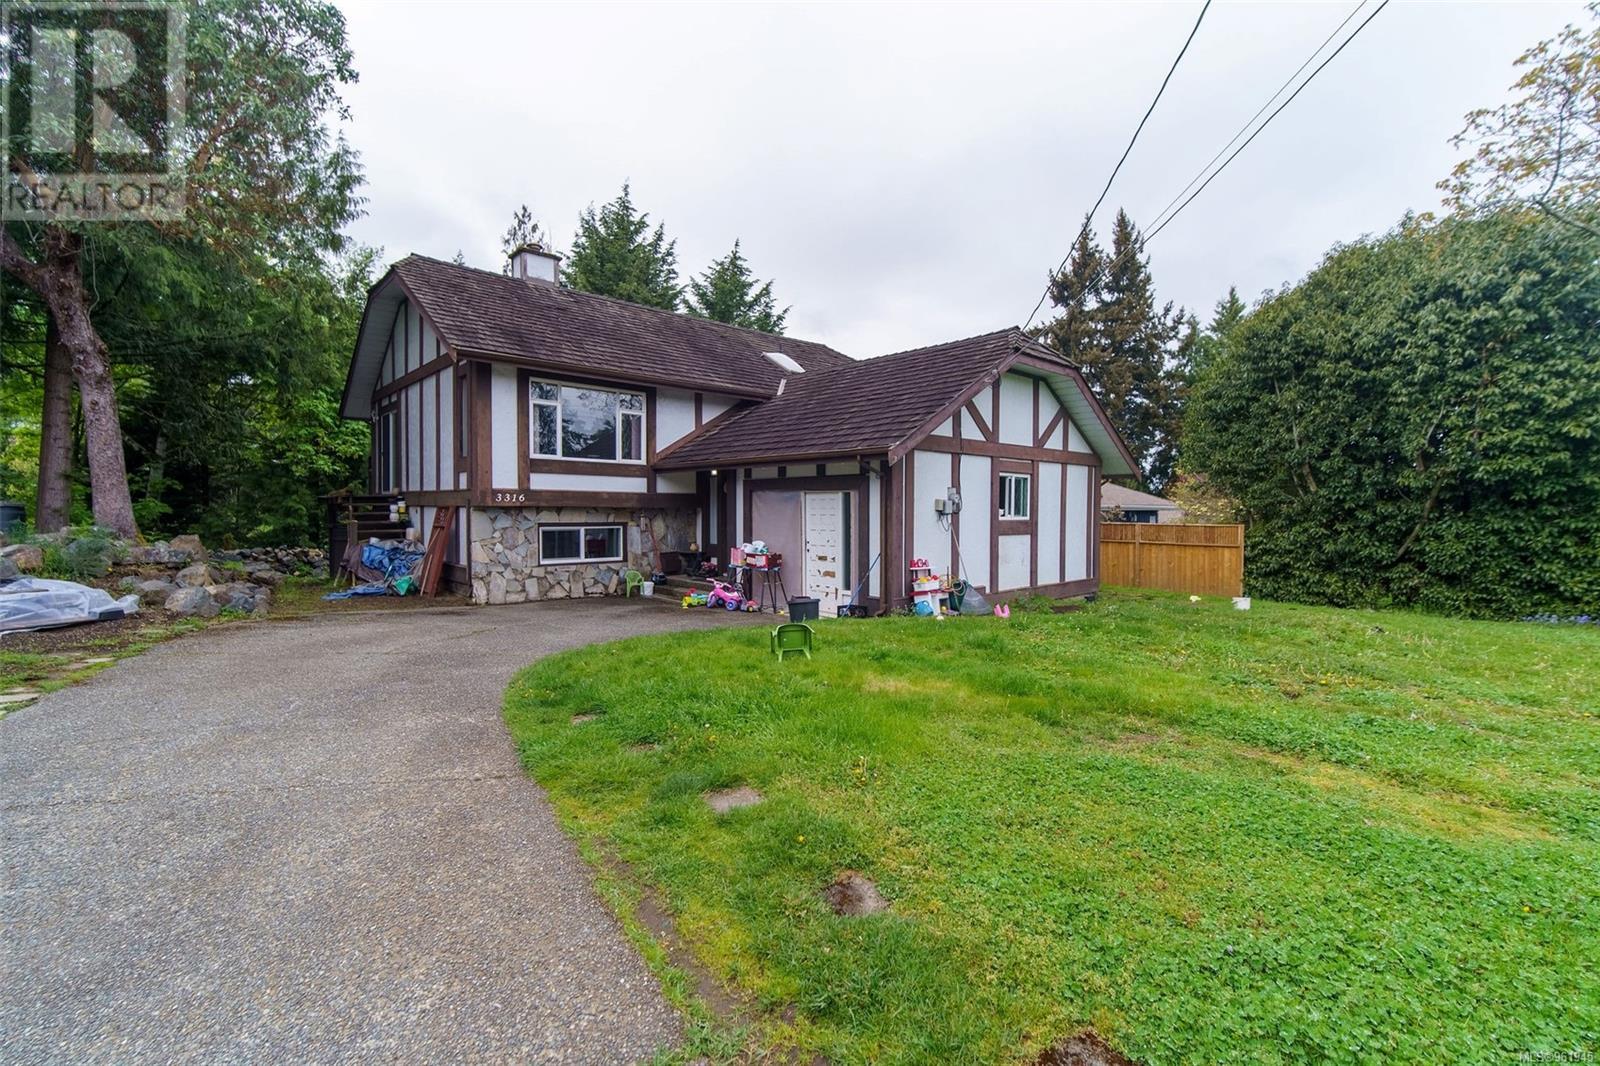 3316 Mary Anne Cres, Colwood